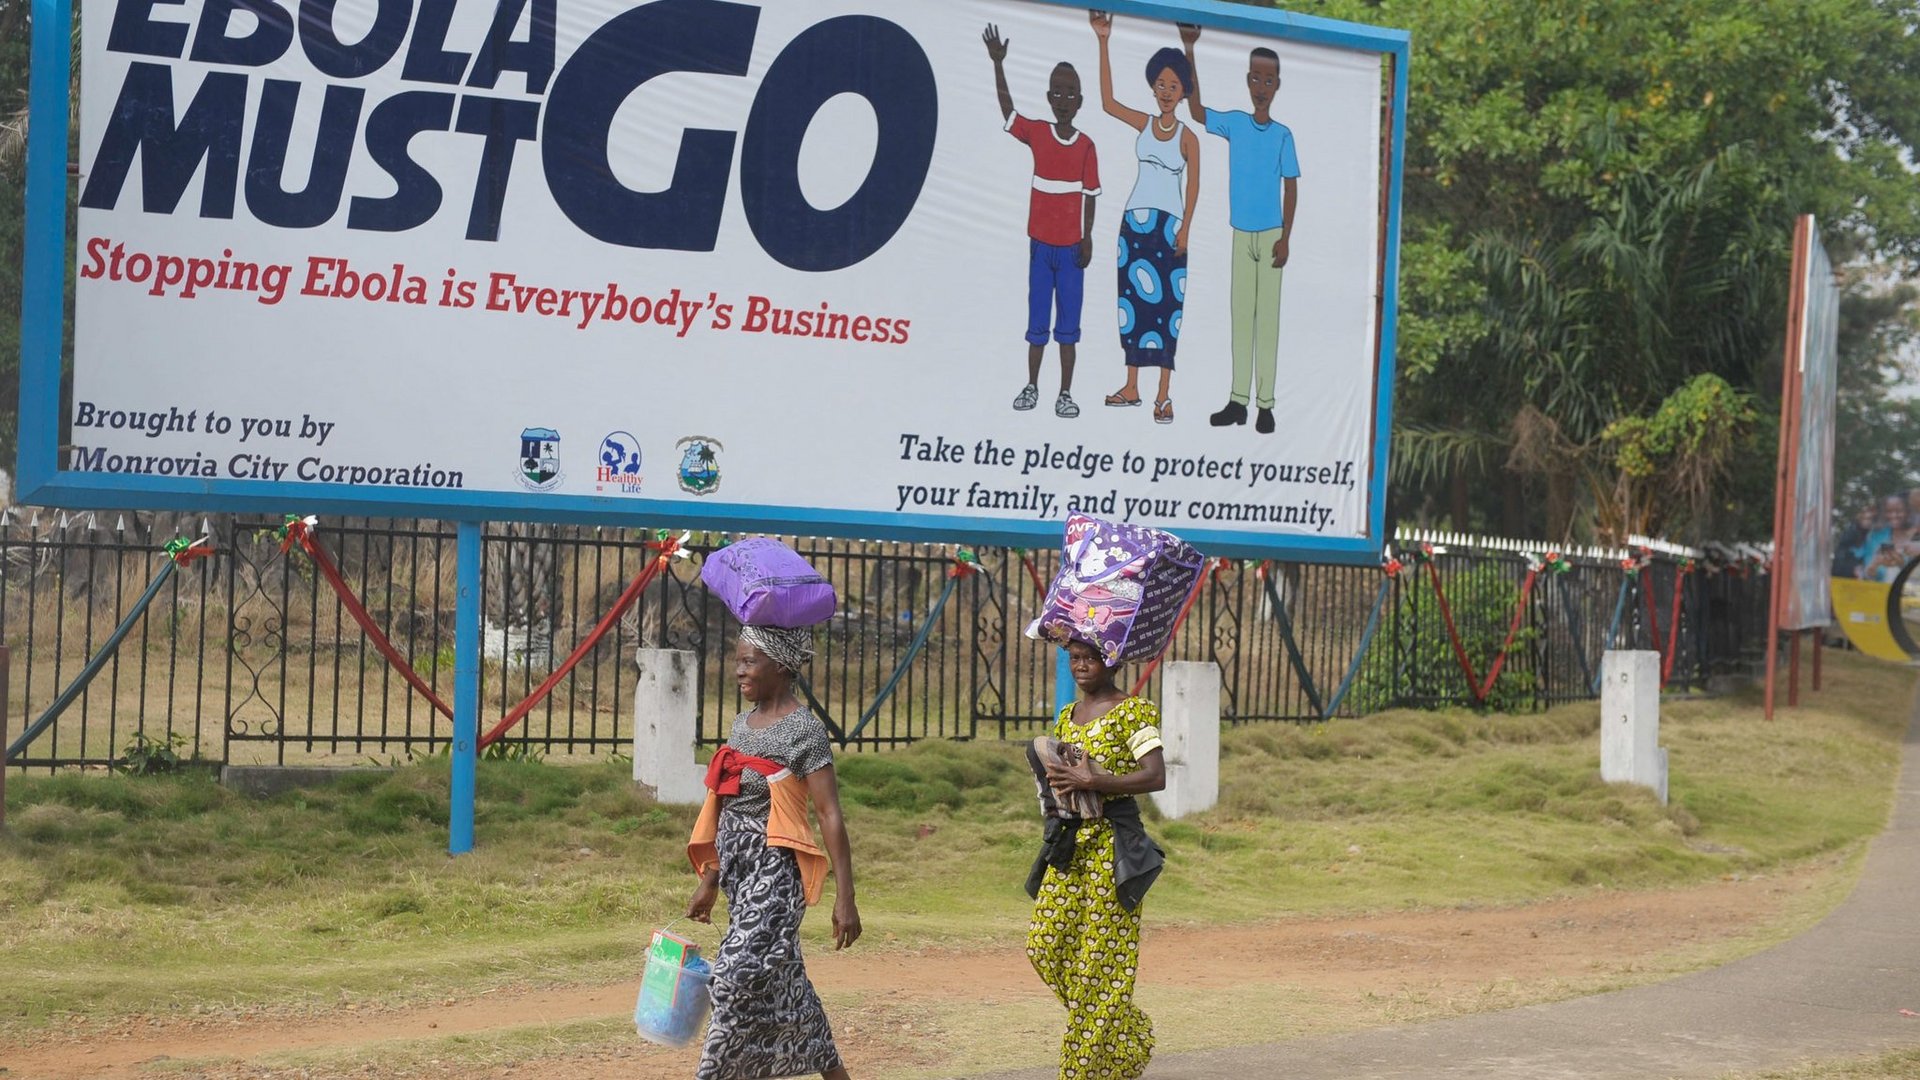 The picture shows two women walking in the streets of Monrovia, the capital of Liberia. They wear colorful scarves and have bags on their heads. In the background is a large street poster encouraging citizens of Monrovia to help fight Ebola.